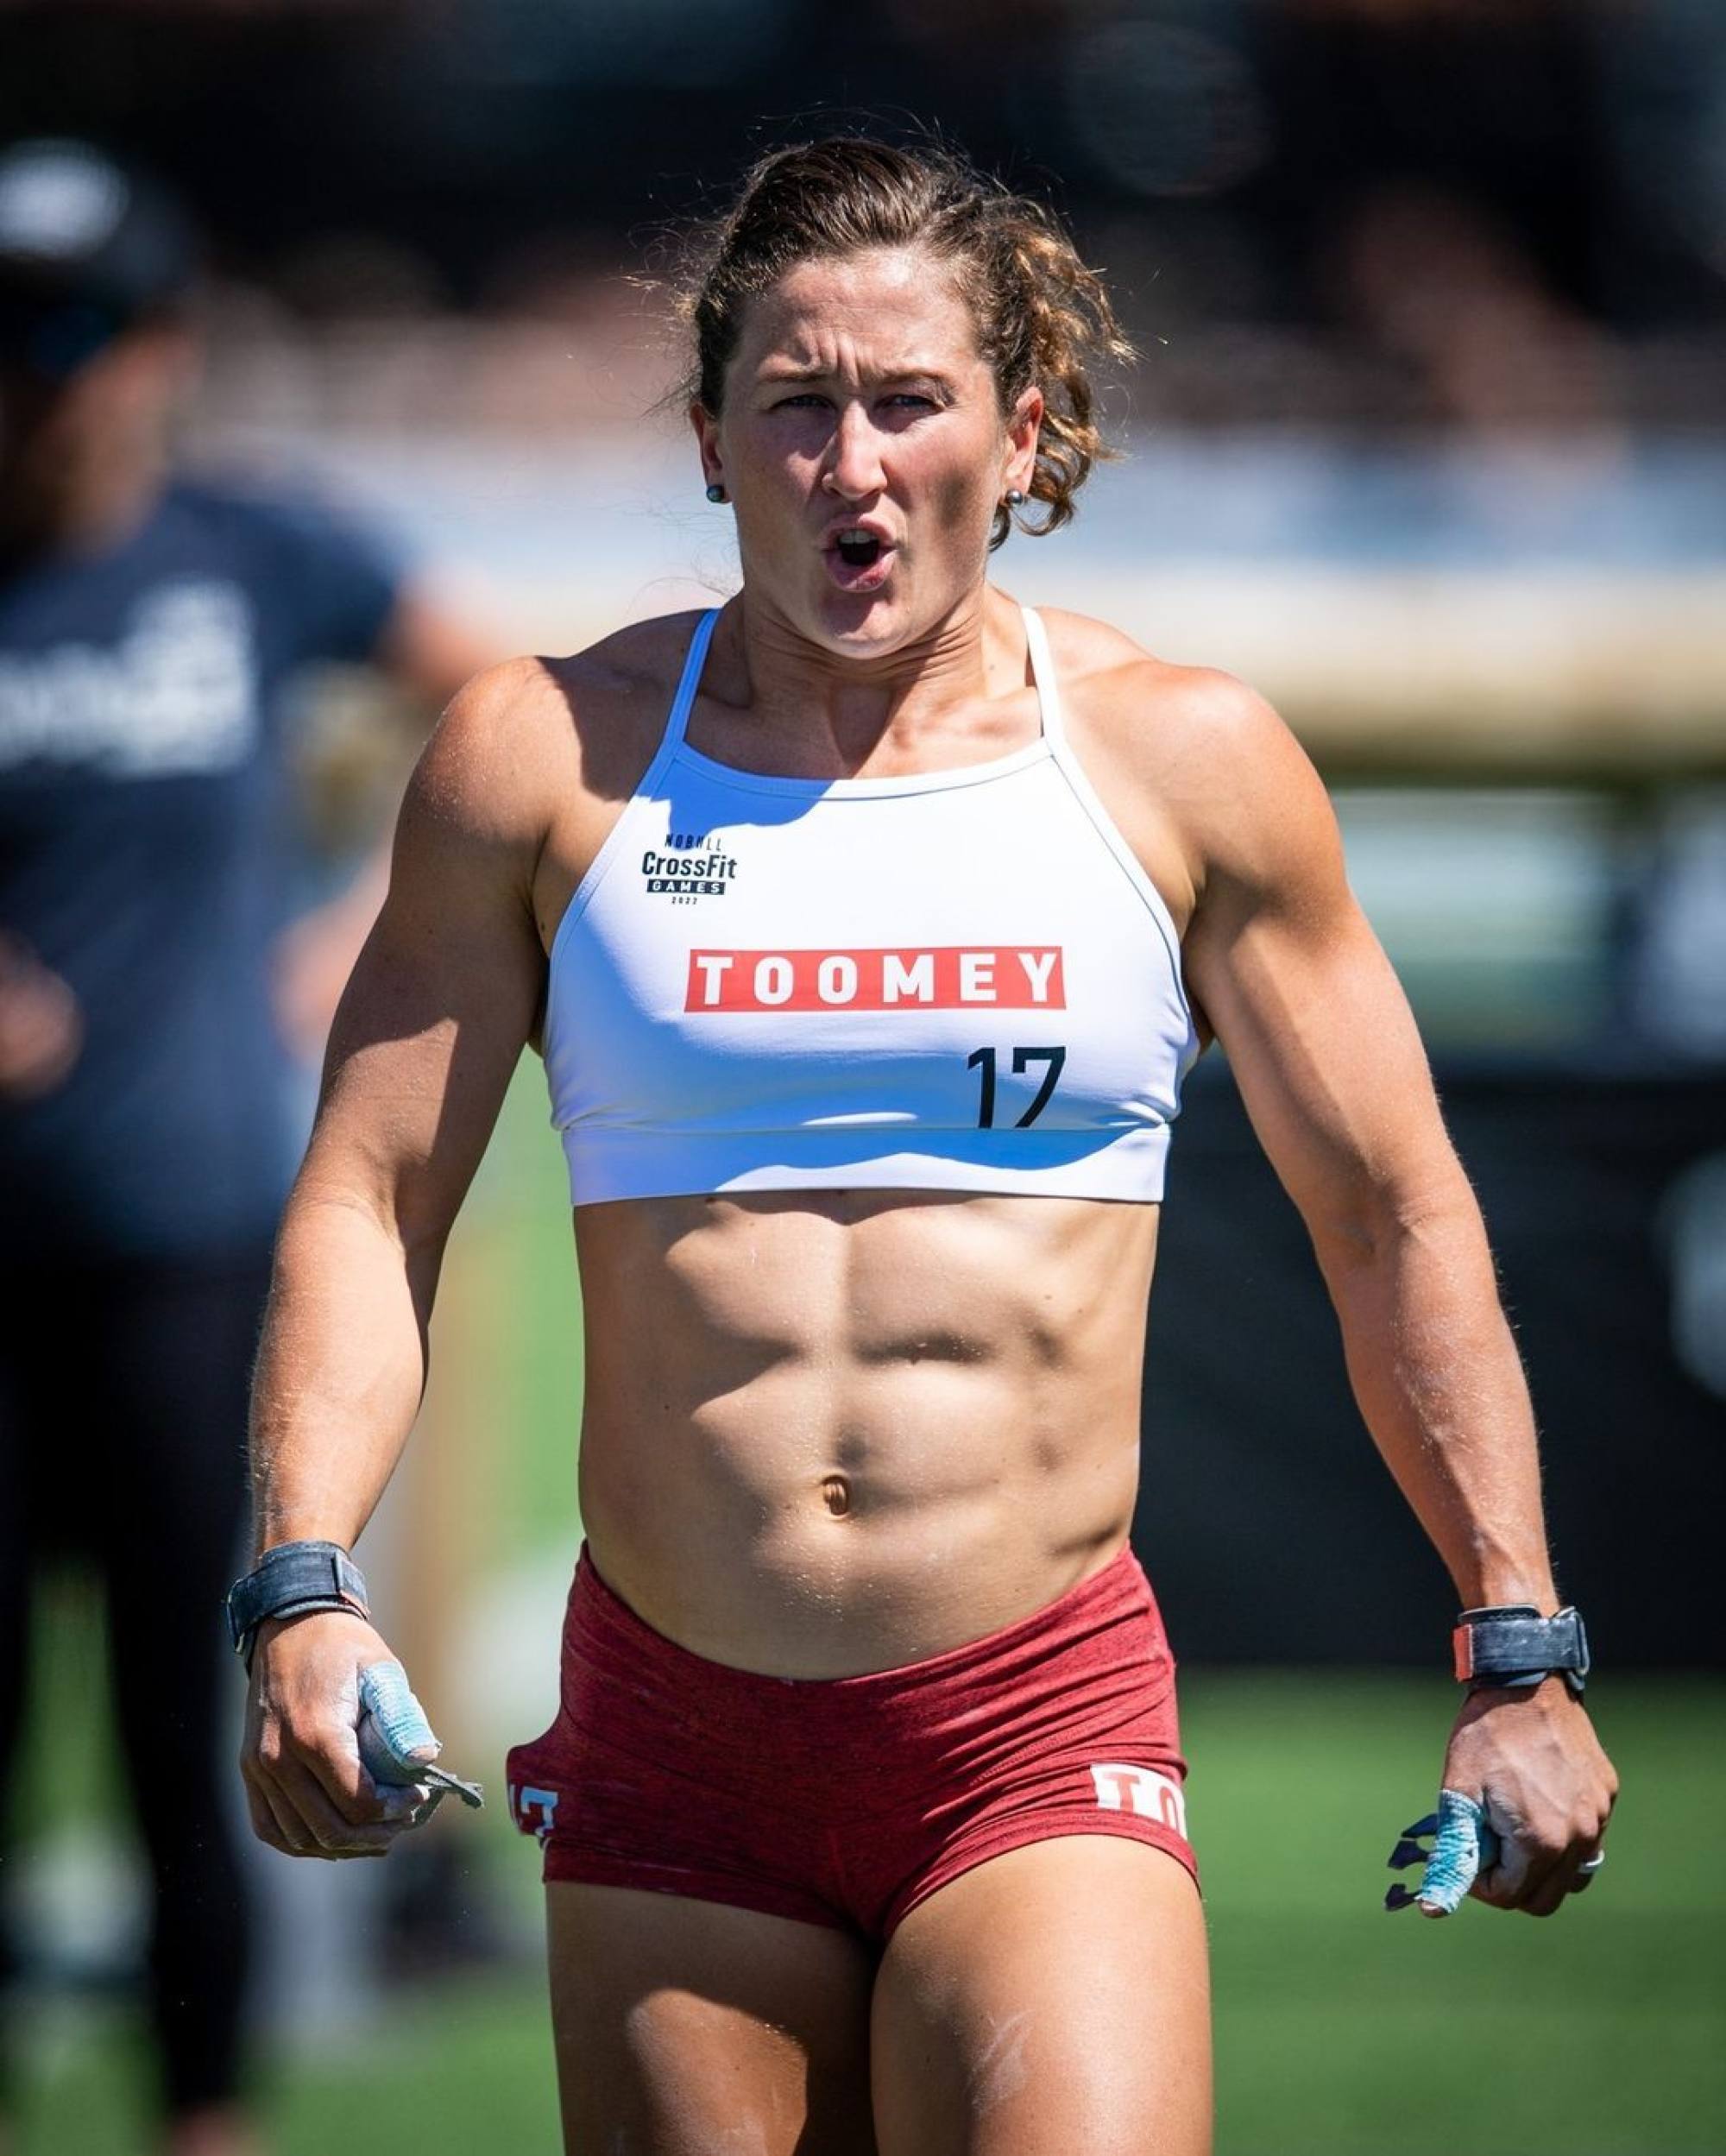 TiaClair Toomey and Justin Medeiros win CrossFit Games 2022, claiming